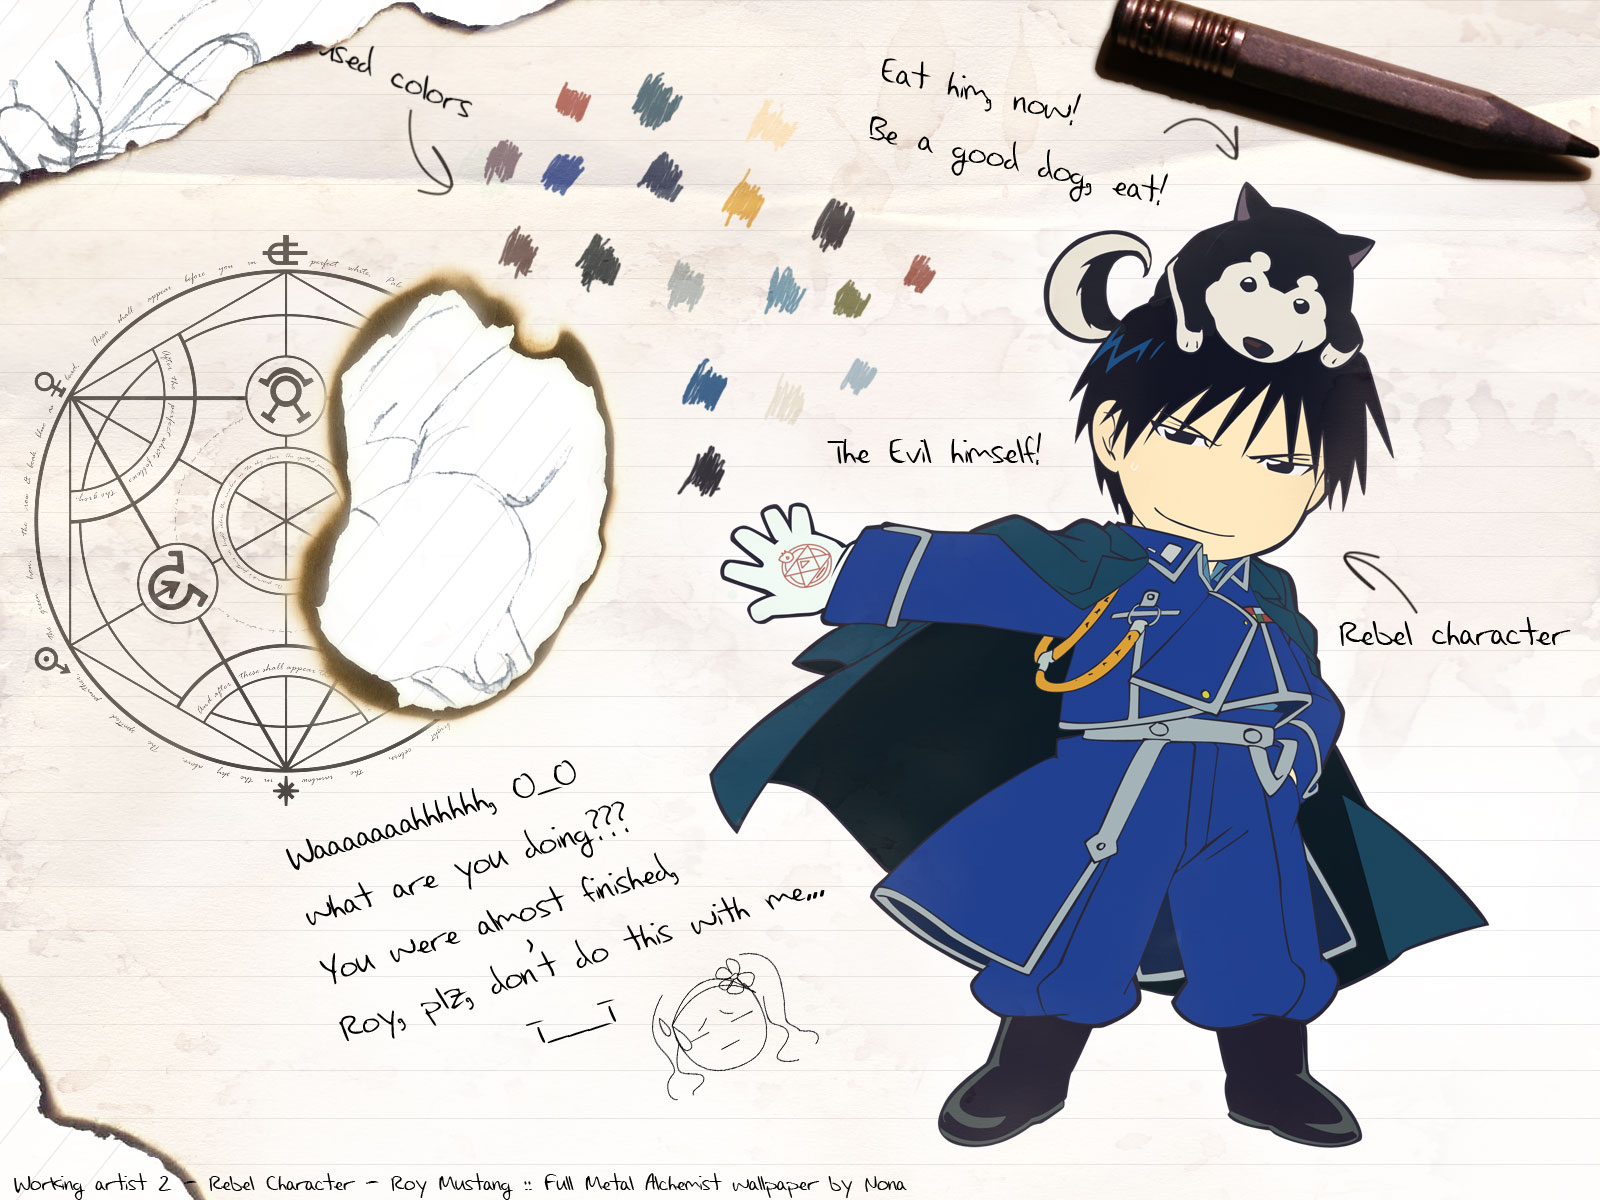 90+ Roy Mustang HD Wallpapers and Backgrounds